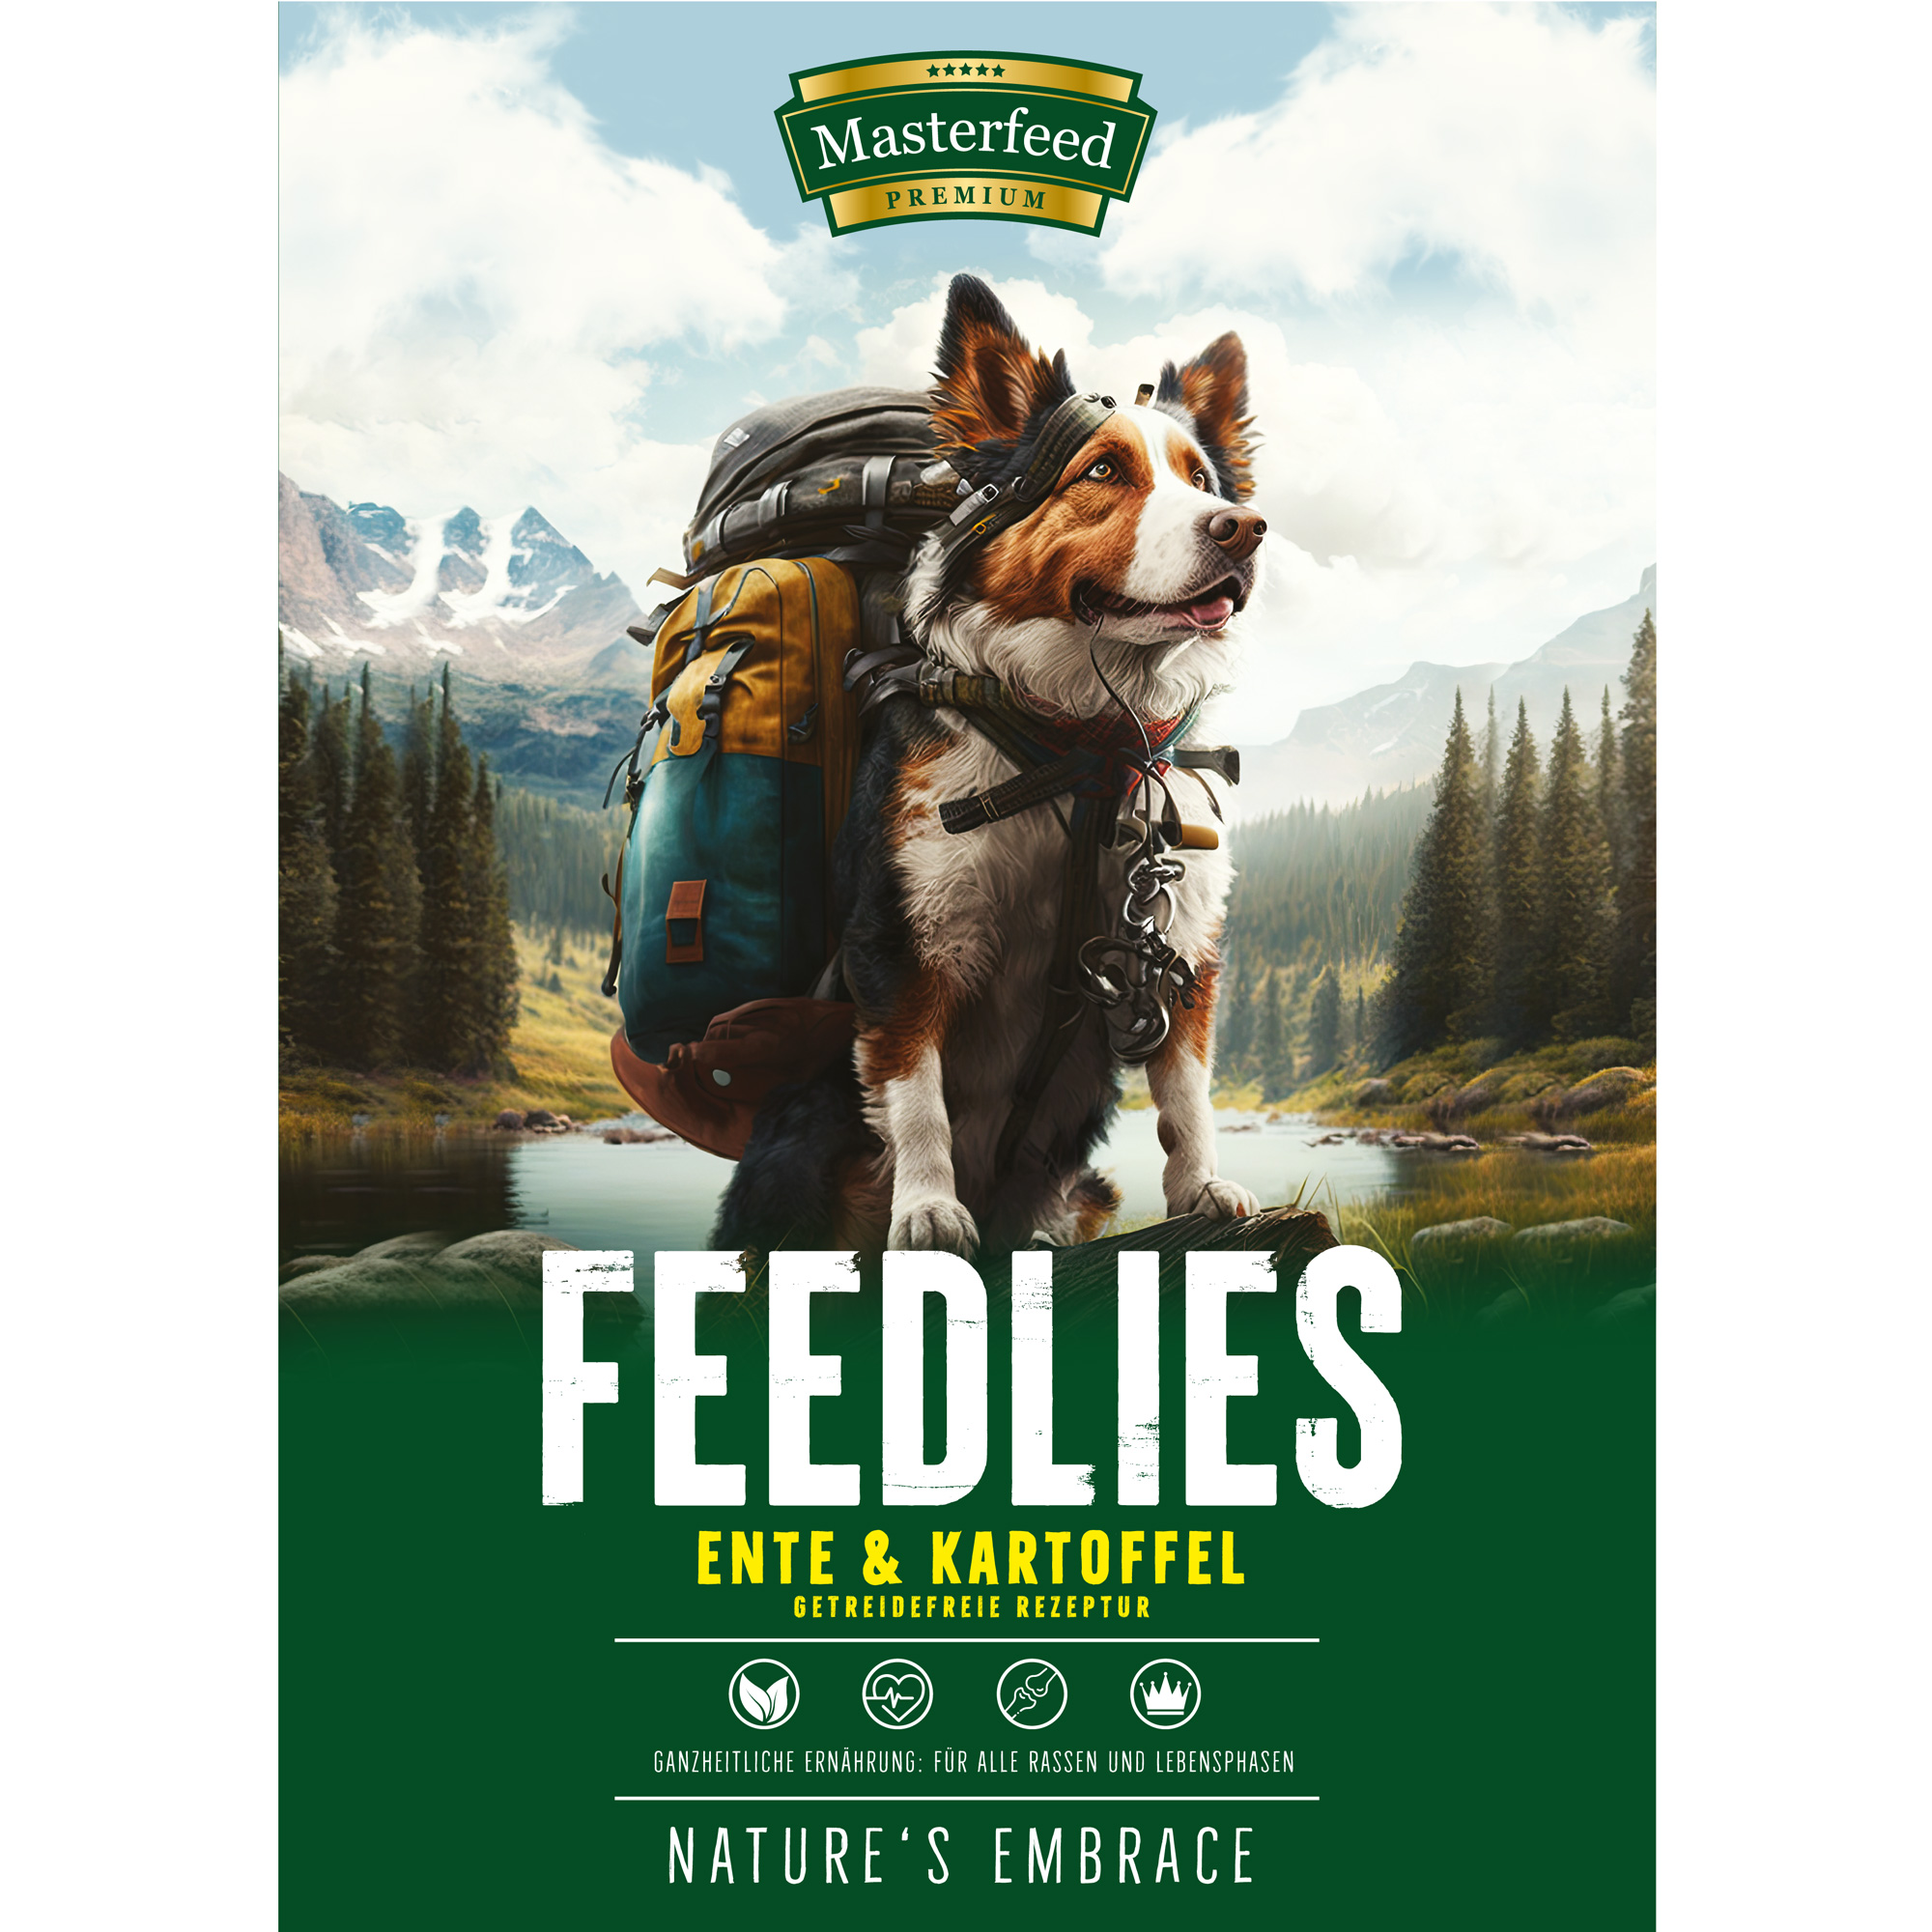 Masterfeed Feedlies Duck & Potato 12kg: Premium Grain-Free Dry Dog Food for Active, Healthy Dogs